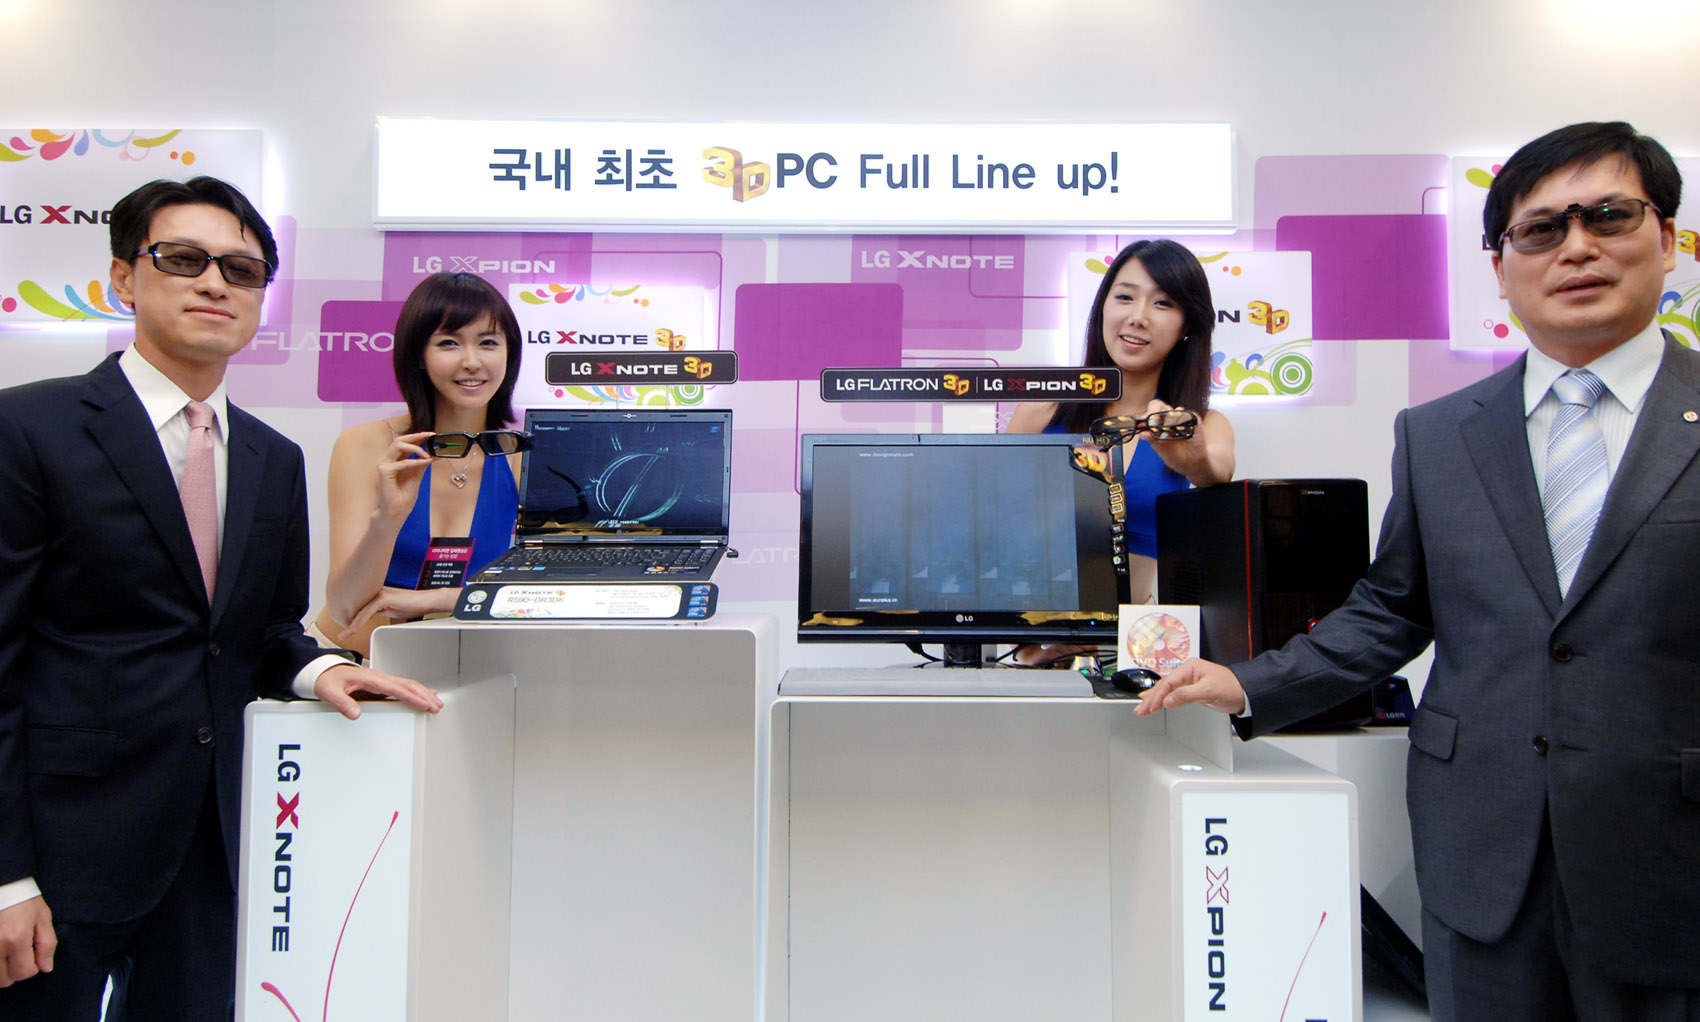 three asian people pose in front of the electronic computers